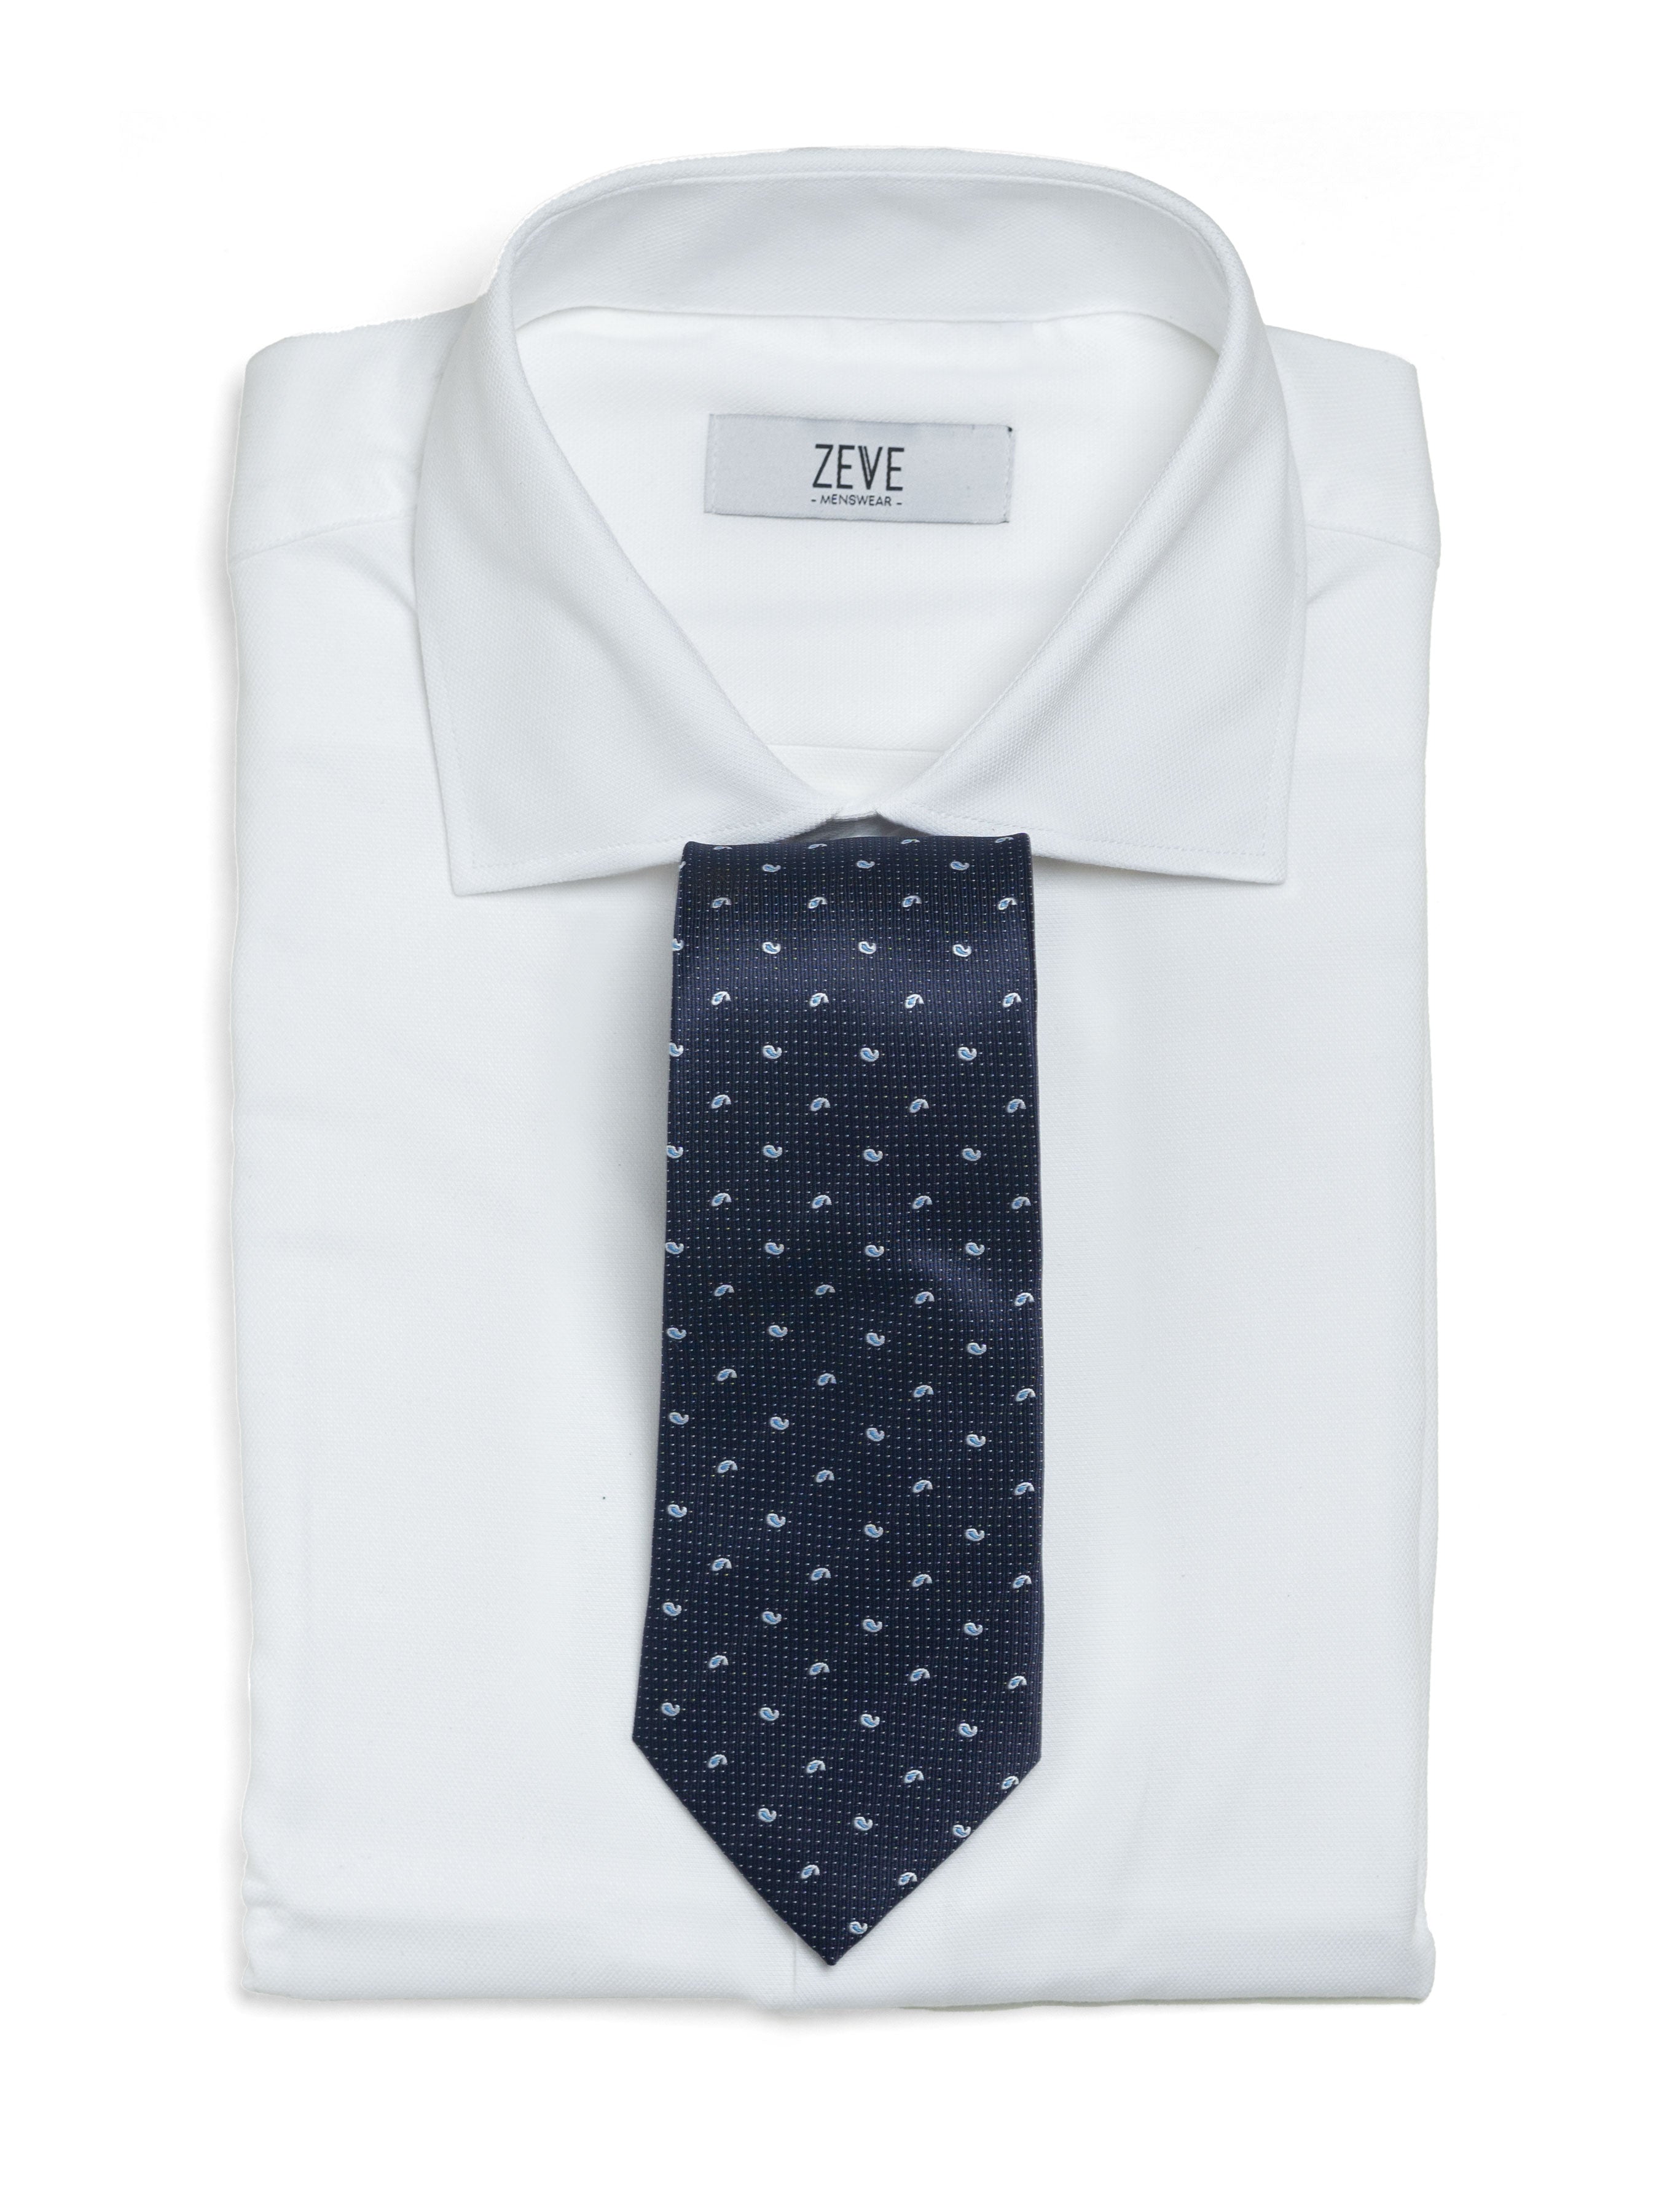 Budding Paisley Tie - Navy Blue with White Dot - Zeve Shoes